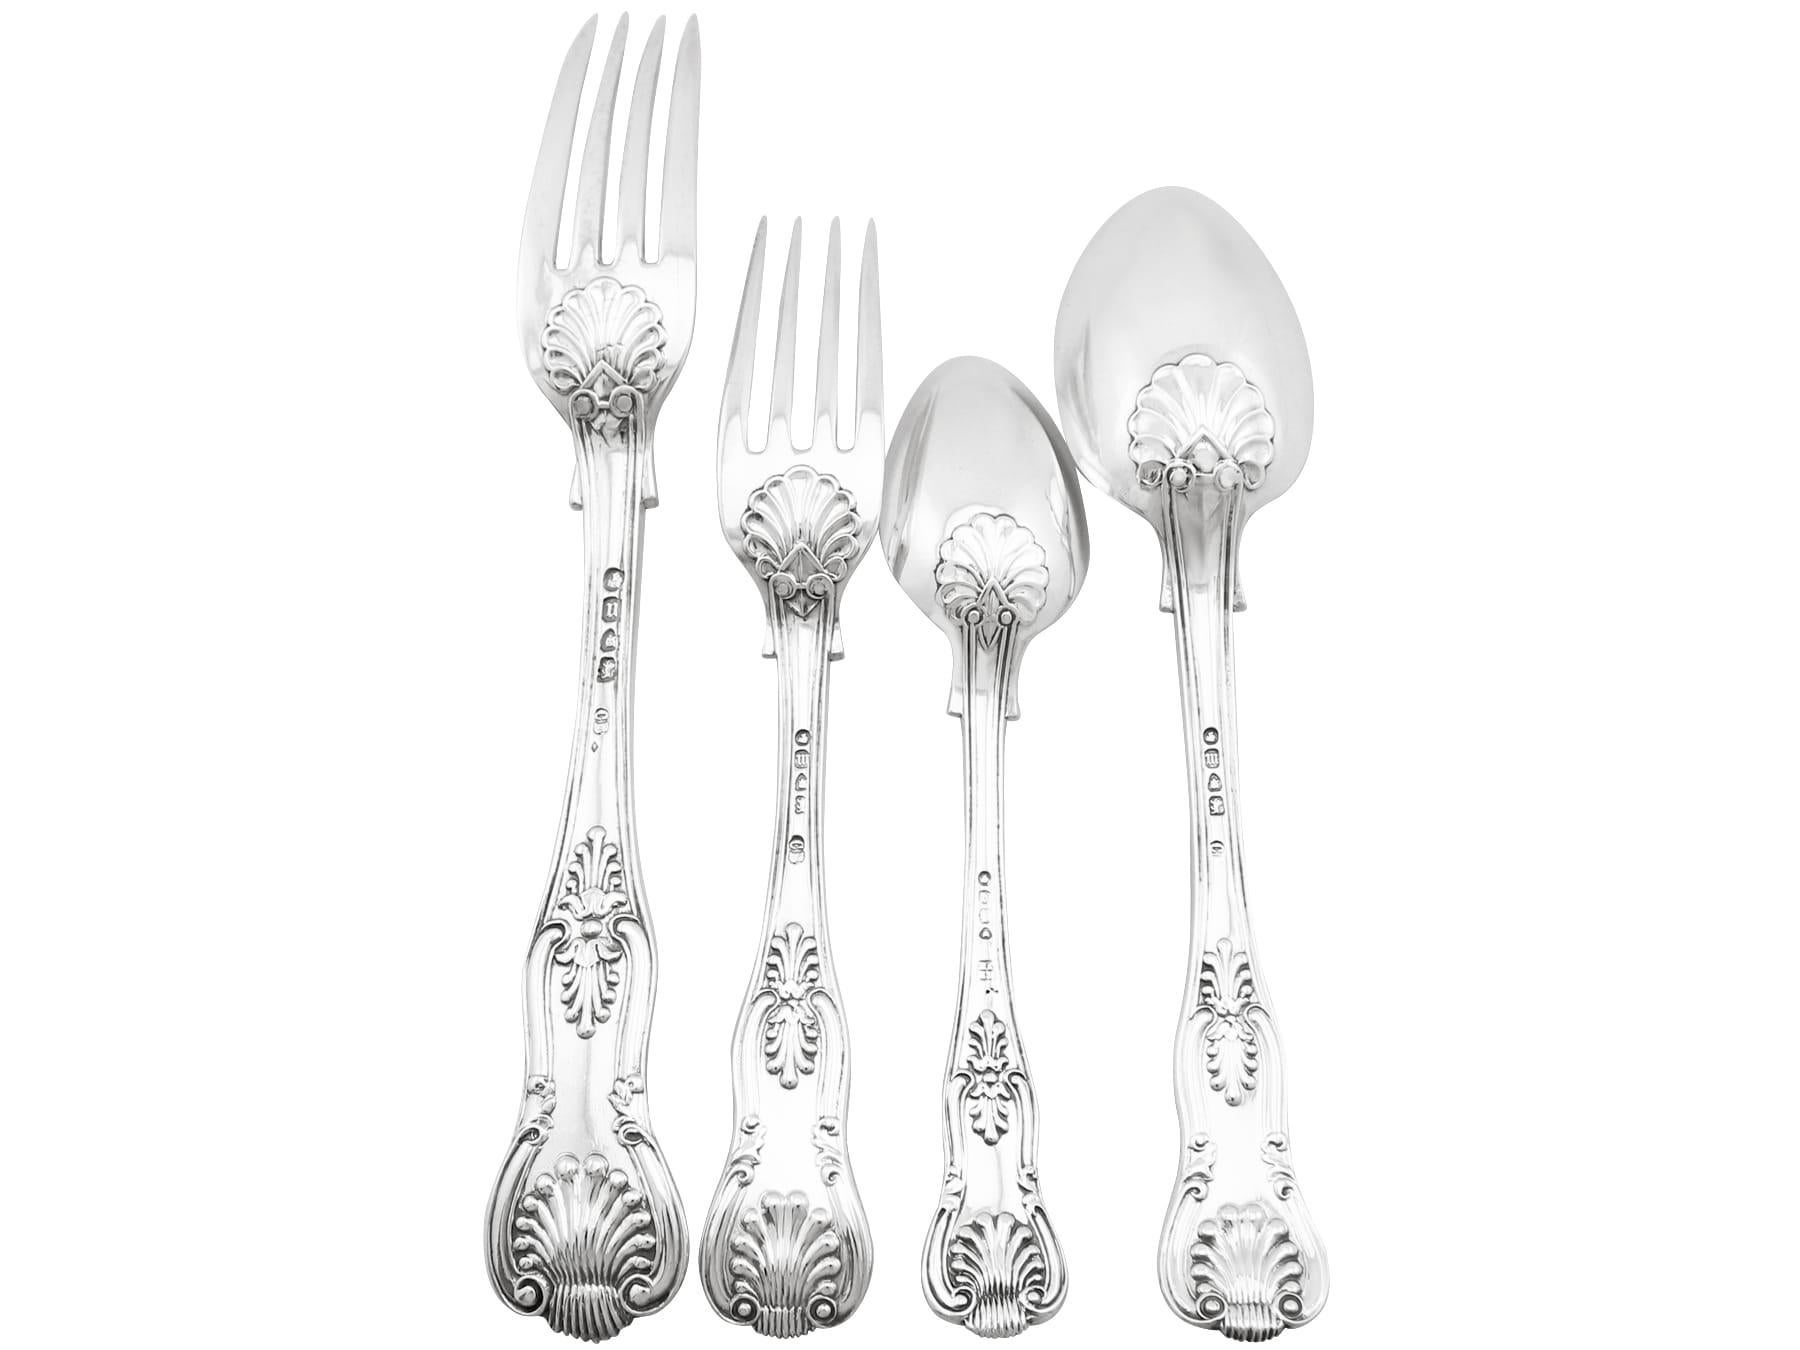 An execptional, fine and impressive antique Victorian English straight sterling silver King's pattern flatware service for ten persons; an addition to our canteen of cutlery collection

The pieces of this fine, antique Victorian straight* sterling